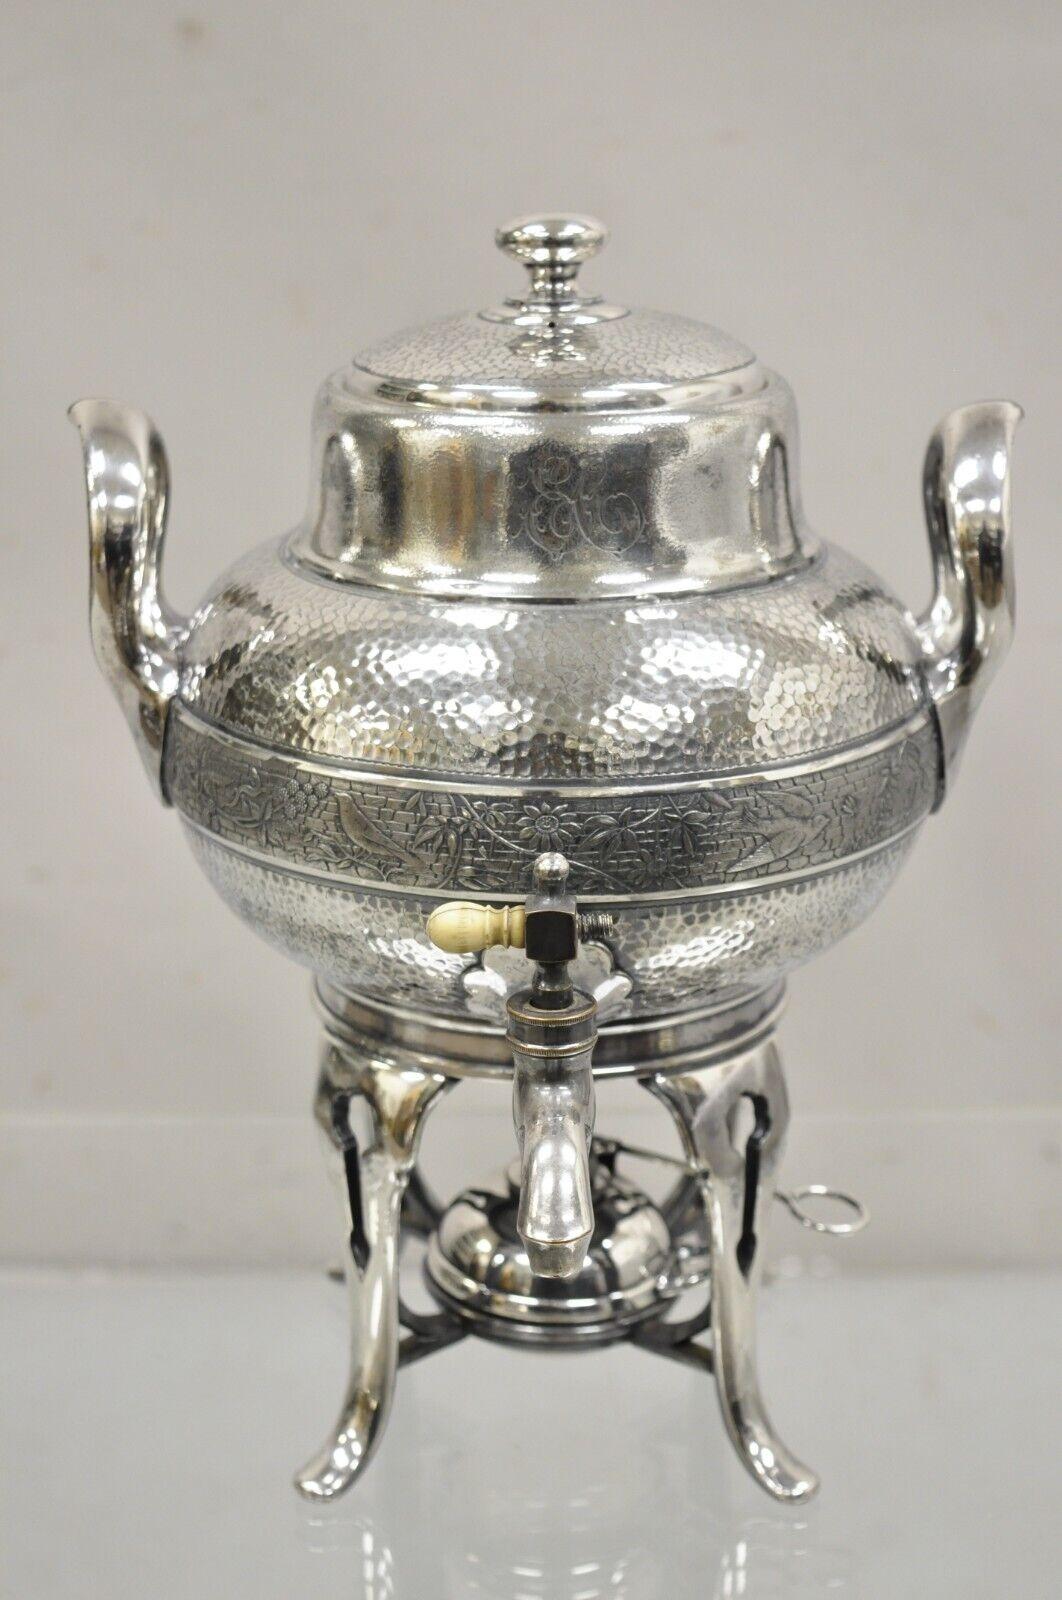 Antique Victorian Silver Plated Hand Hammered Samovar Coffee Pot Warmer. Item. Item features monogram letters to front (illegible), very nice antique Samovar. Circa Early 1900's. Measurements: 13